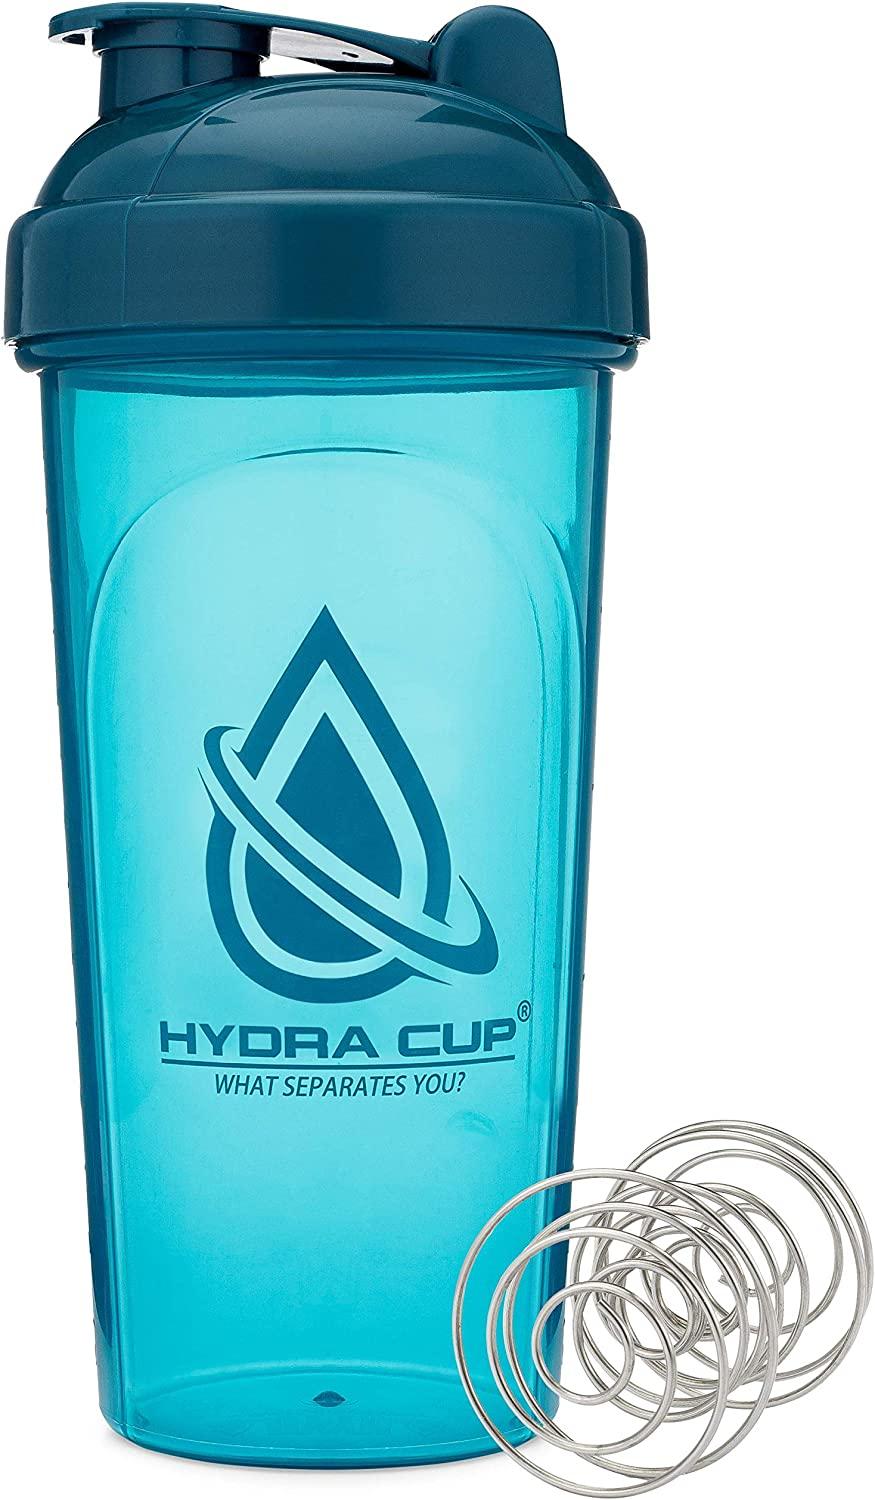 Hydra Cup Hydra cup 4 Pack] - Protein Powder Funnel & Three